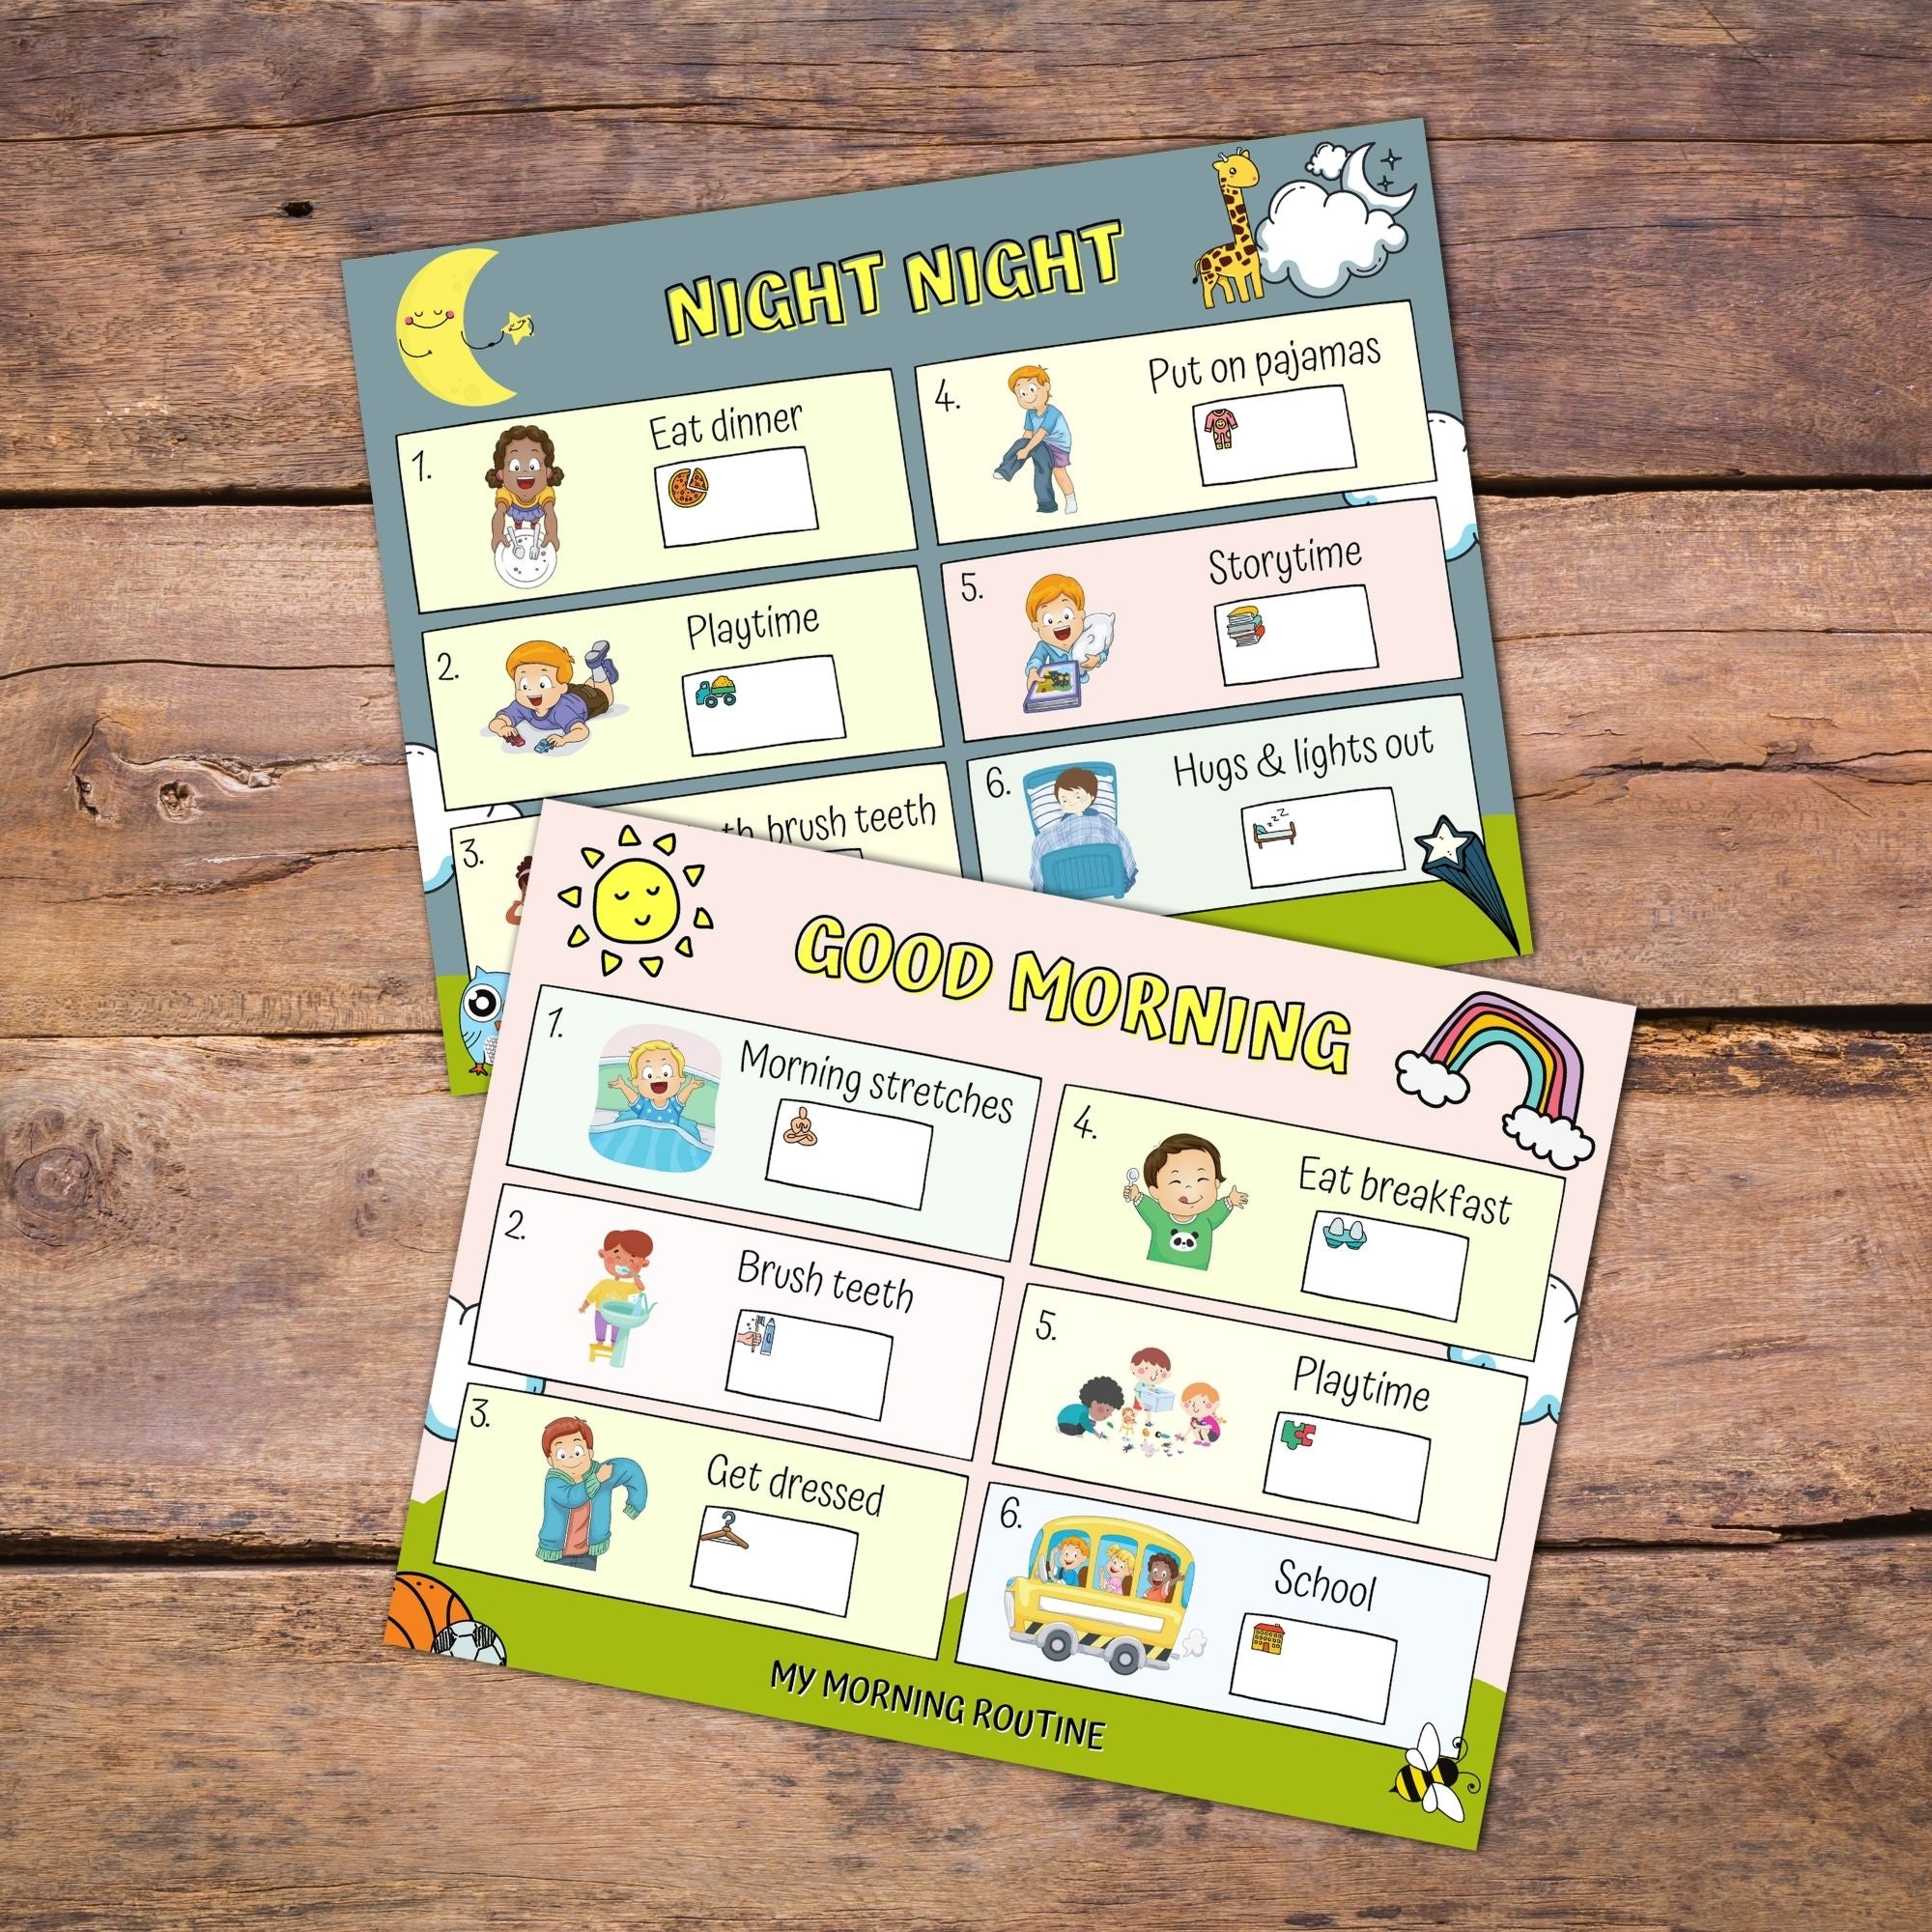 Premade Routine Charts for Kids PDF (Ages 2 to 10)